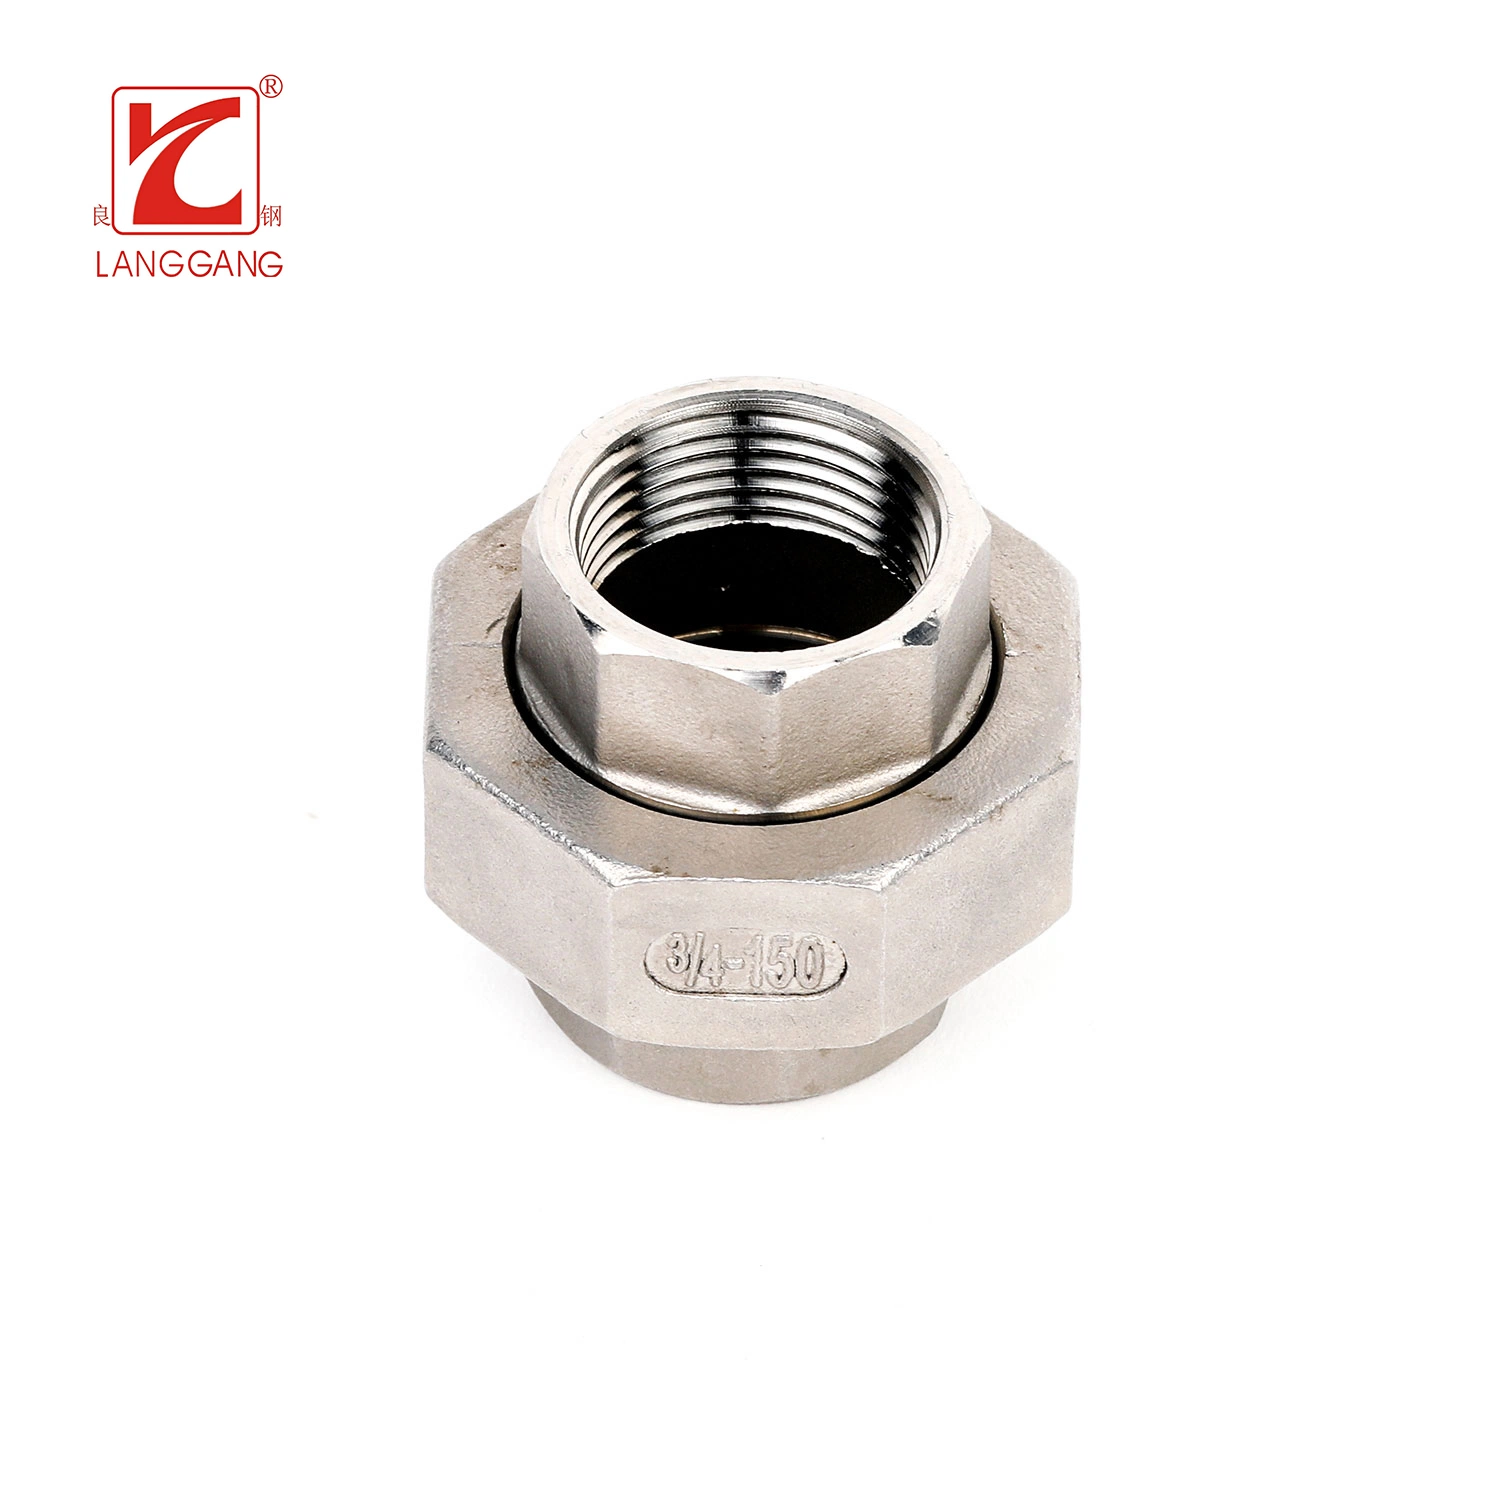 Thread Screw Stainless Steel Unions Conica Forged Female Pipe Fittings